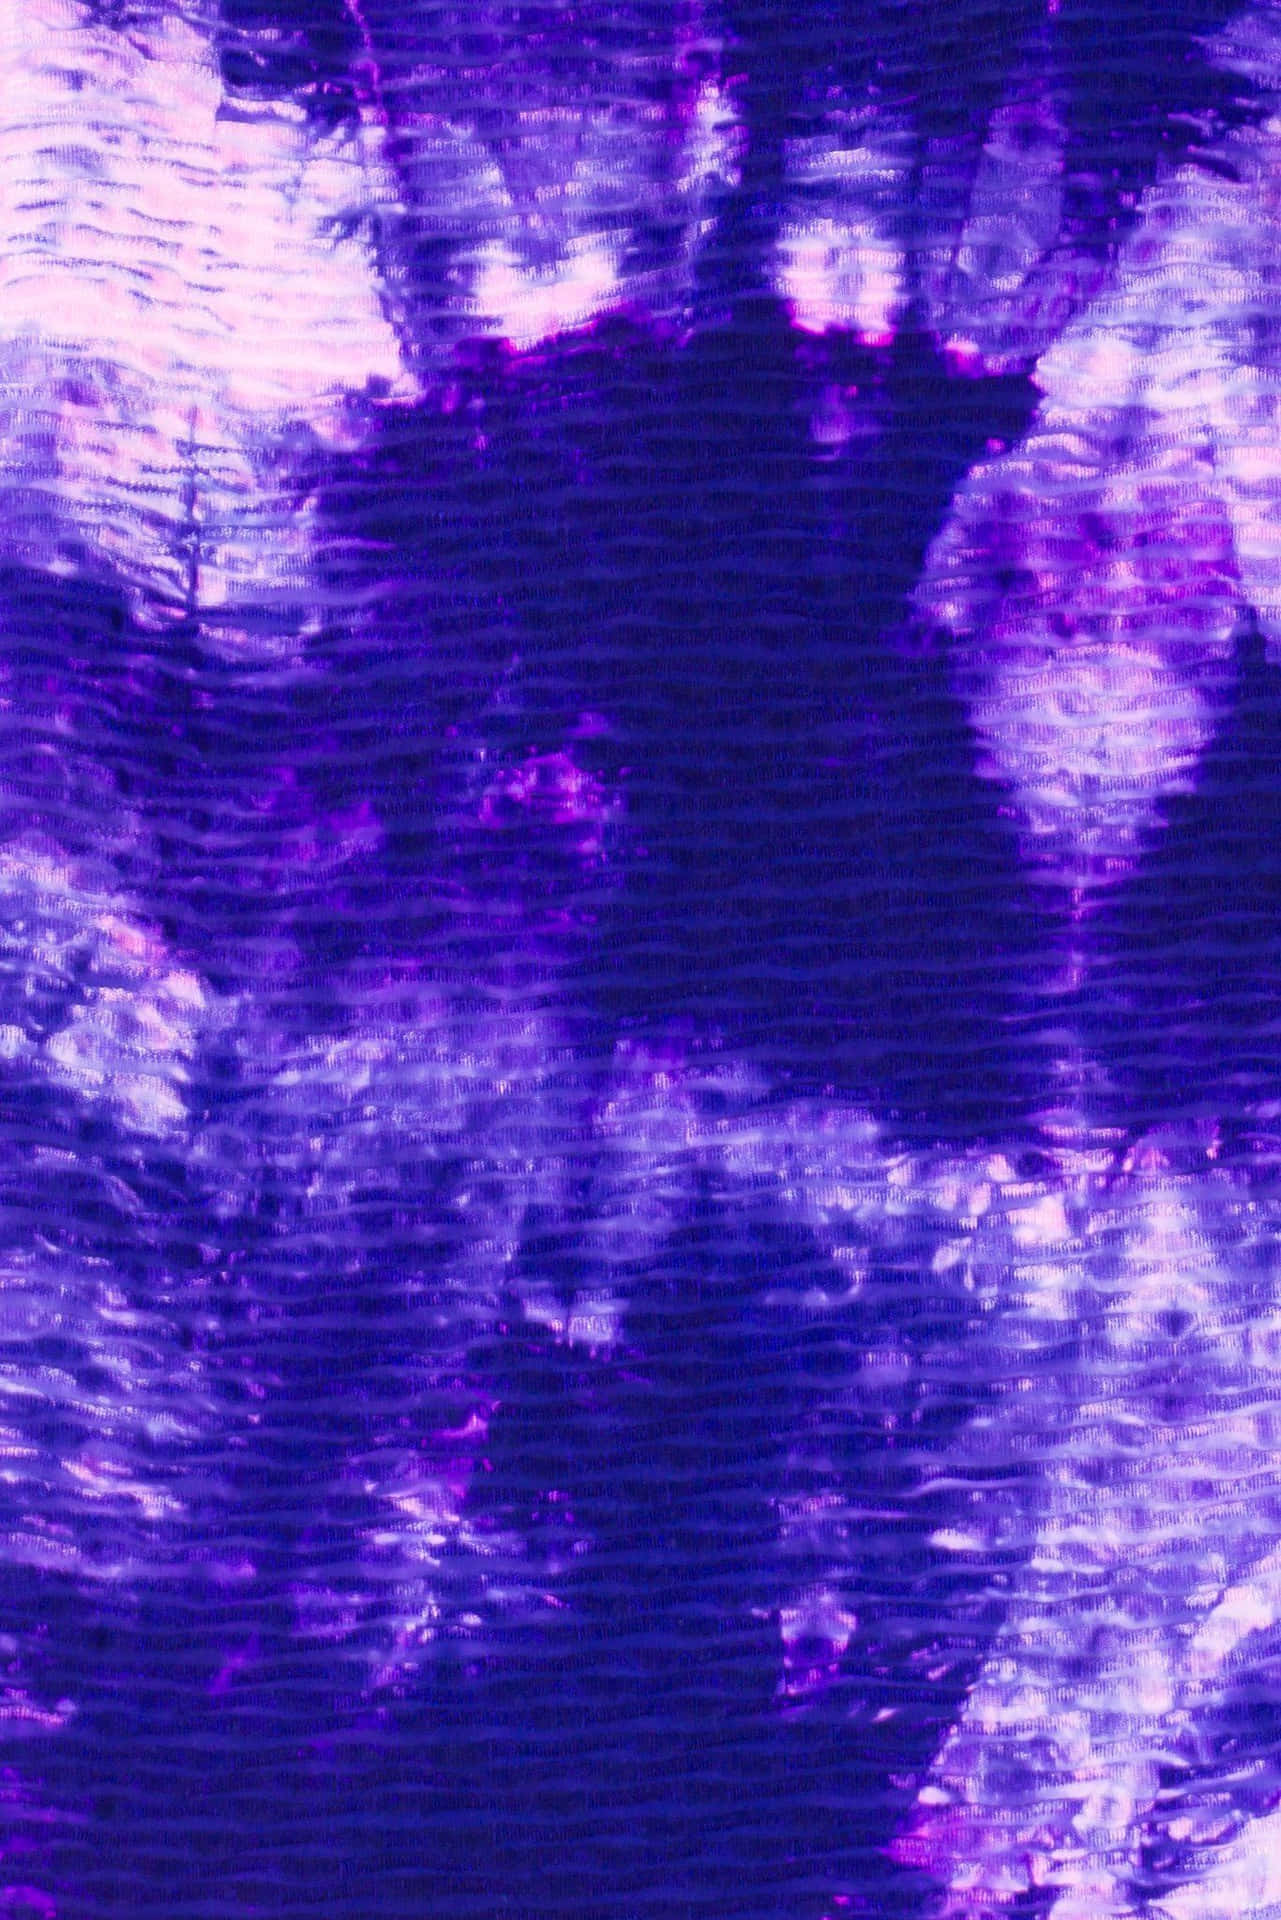 A glass of purple dye with a dark background Wallpaper